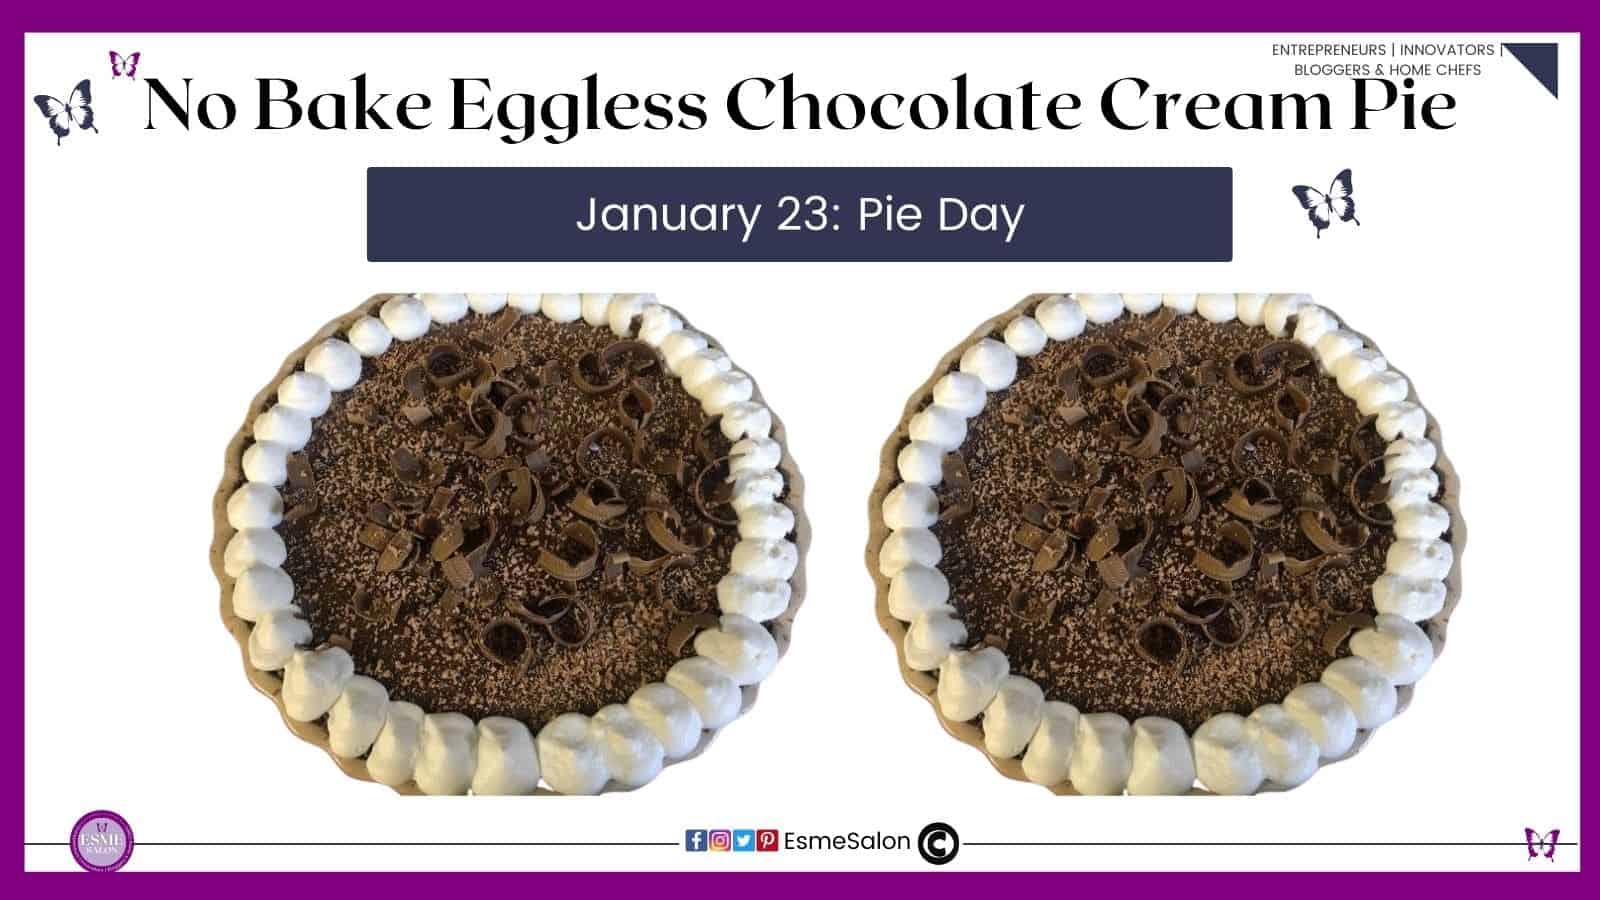 an image of an No Bake Eggless Chocolate Cream Pie with chocolate shavings